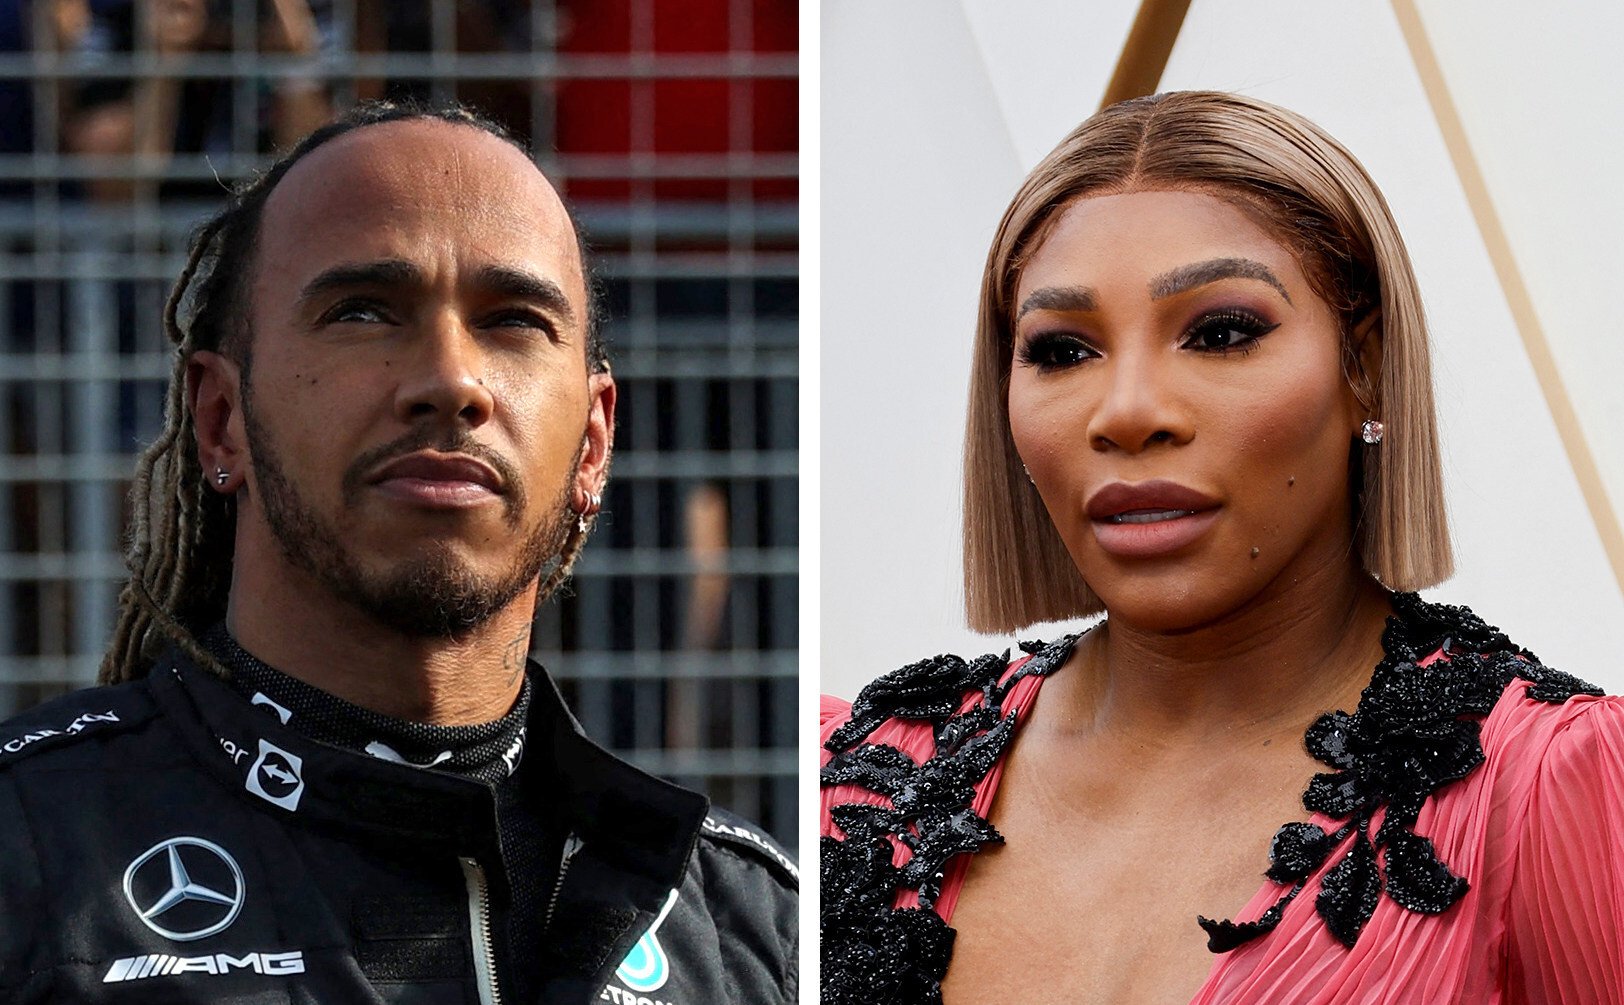 Lewis Hamilton and Serena Williams have each pledged an estimated US$13 million to the Chelsea bid. Photos: Reuters